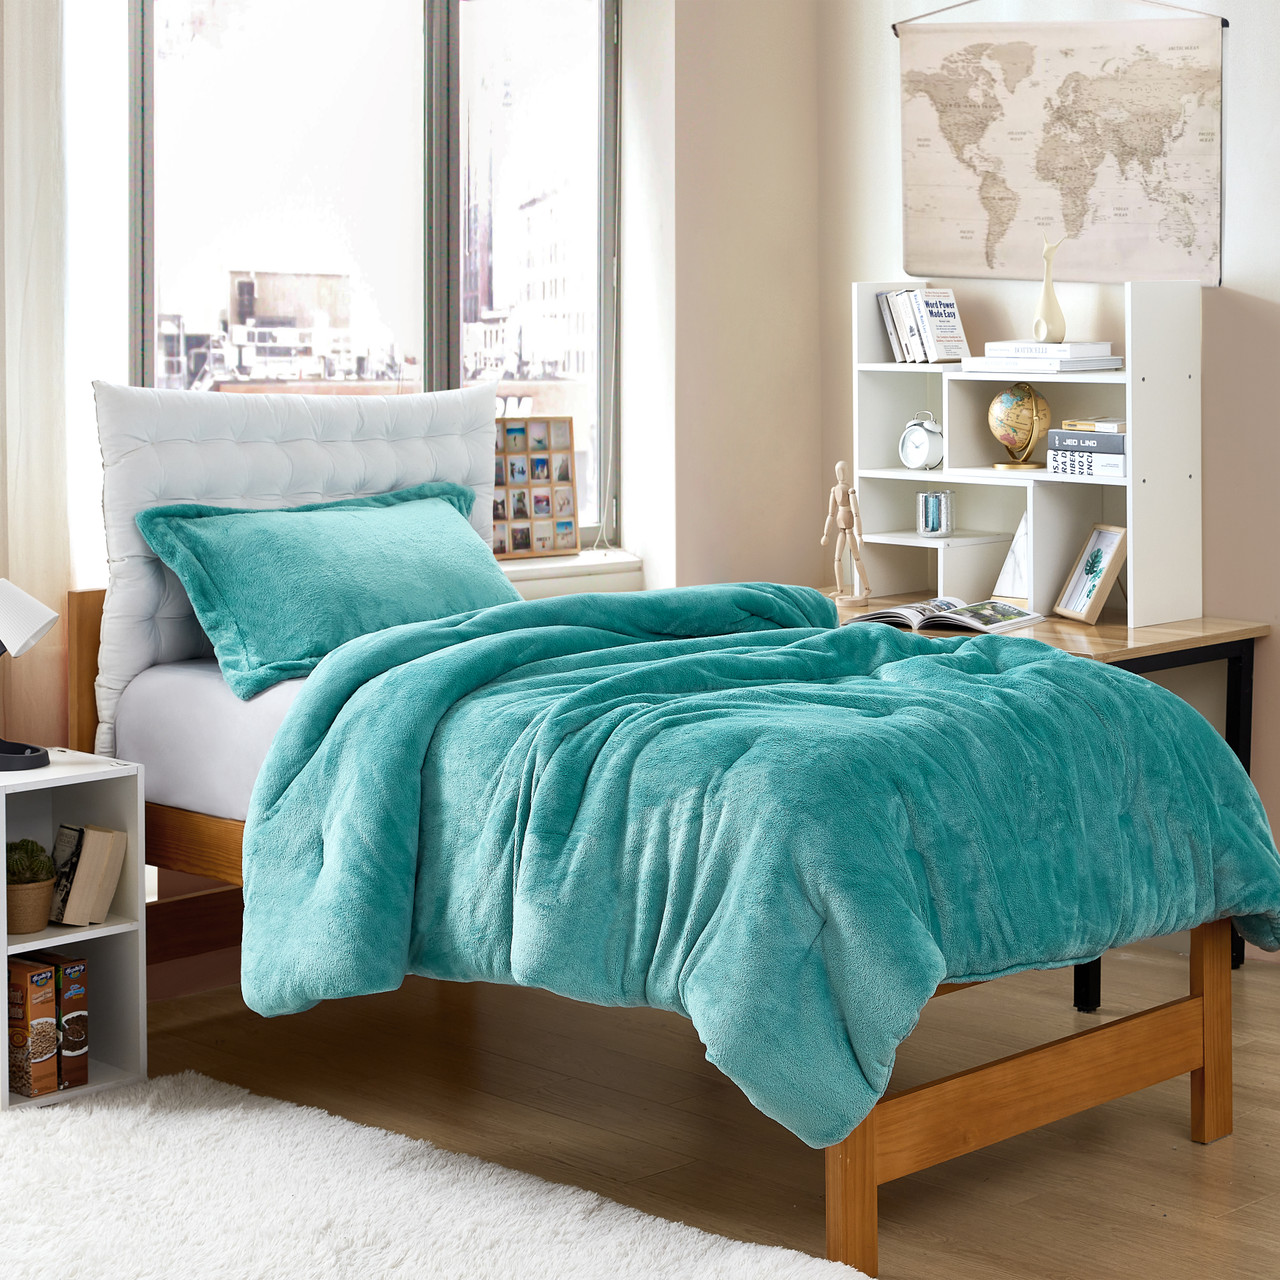 Coma Inducer® Oversized Twin Comforter - Me Sooo Comfy - Dusty Turquoise